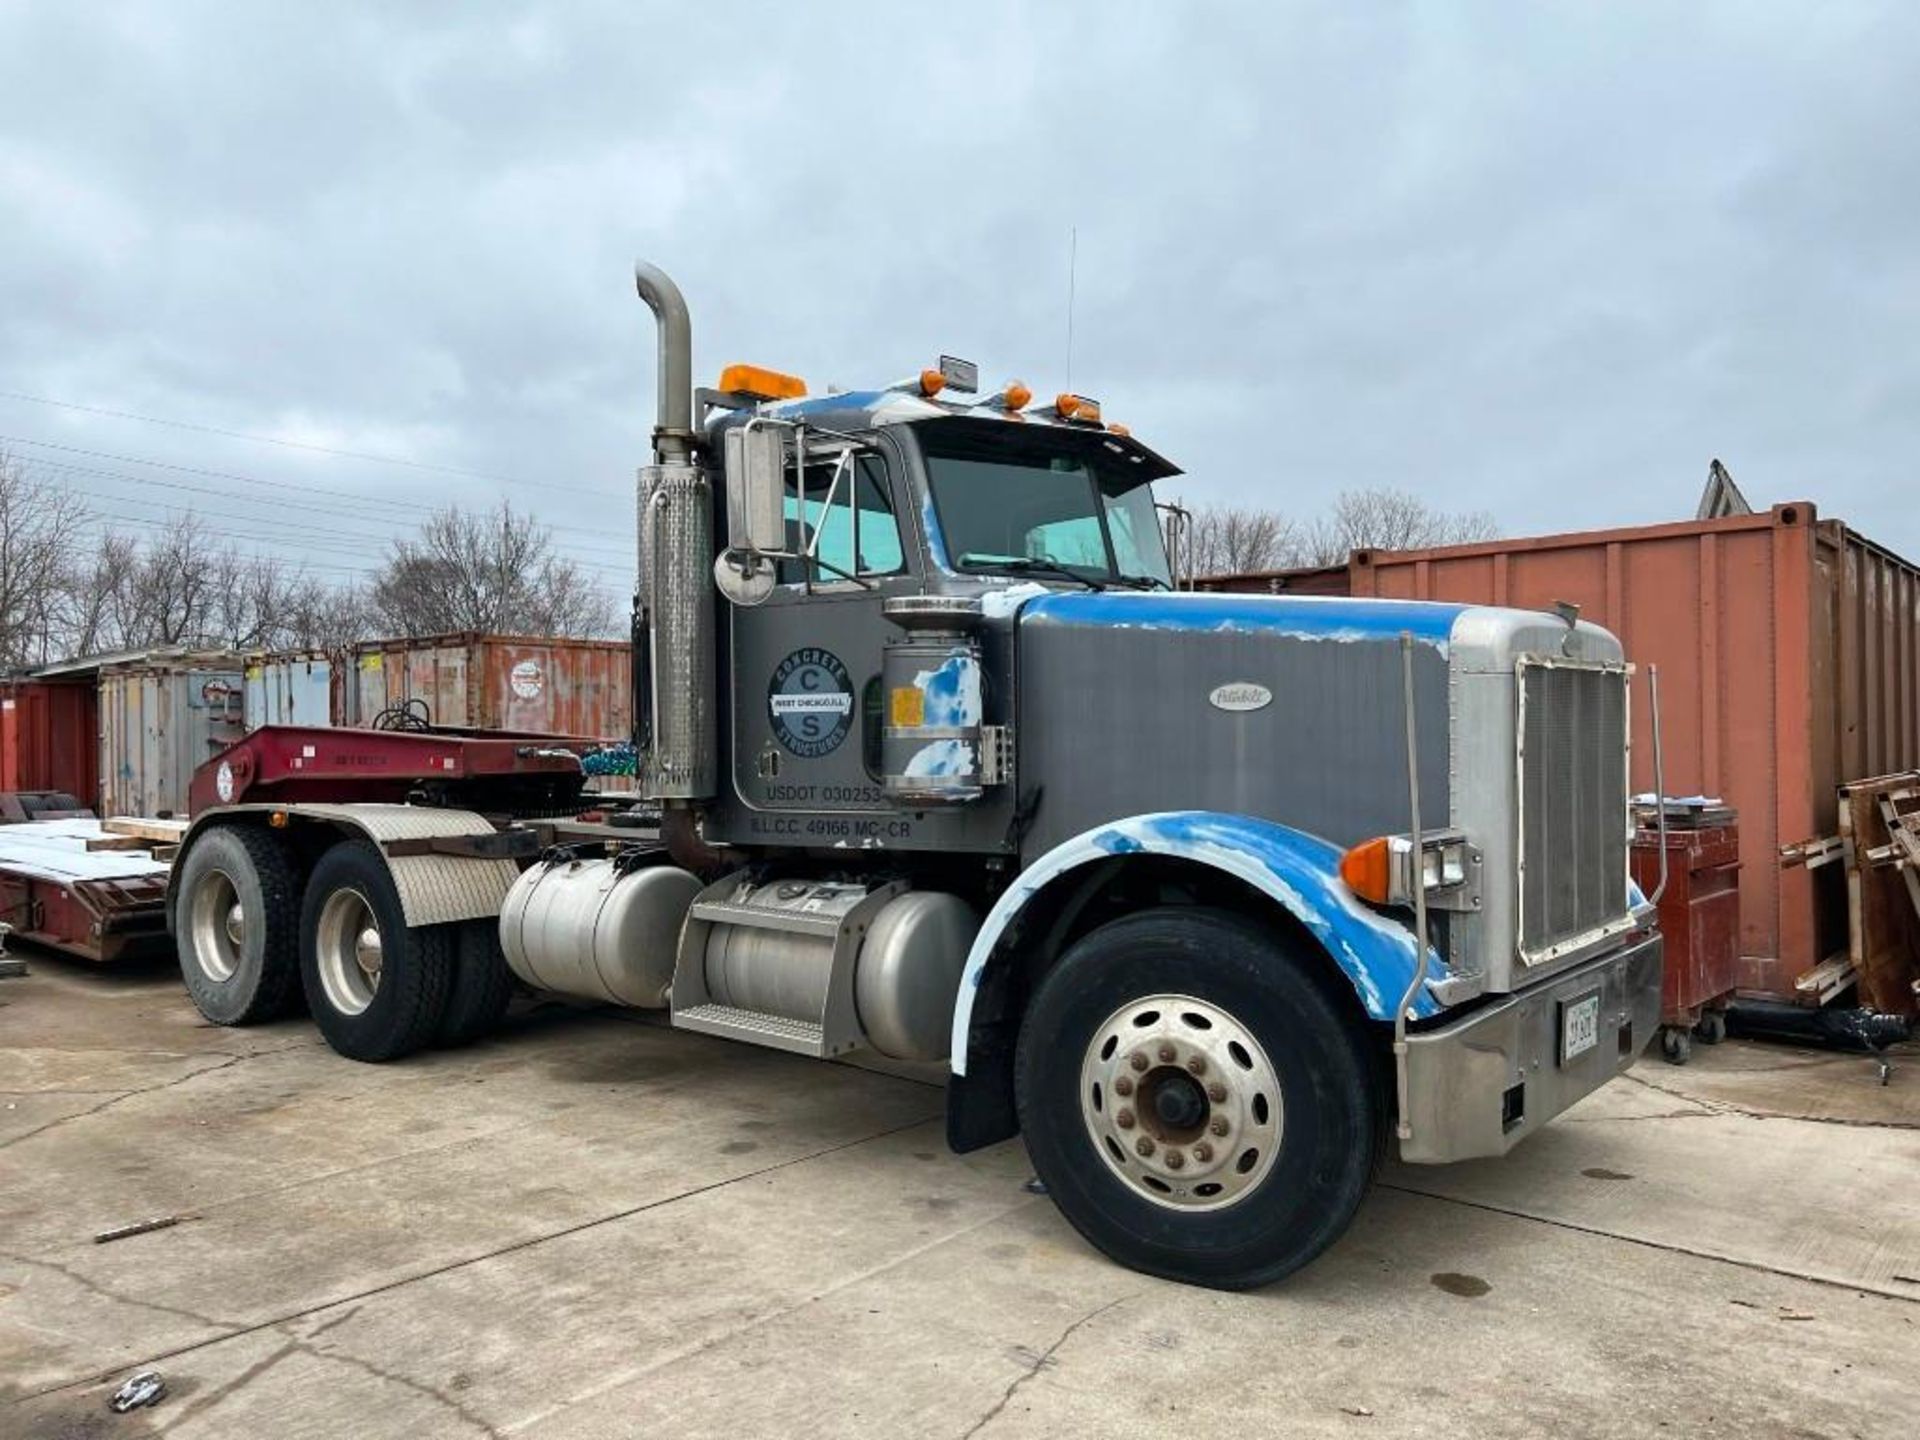 1998 Peterbilt Truck Tractor Model 378, VIN 1XPFDB9X5WN446004, 133,391 Miles Indicated, Day Cab, Wit